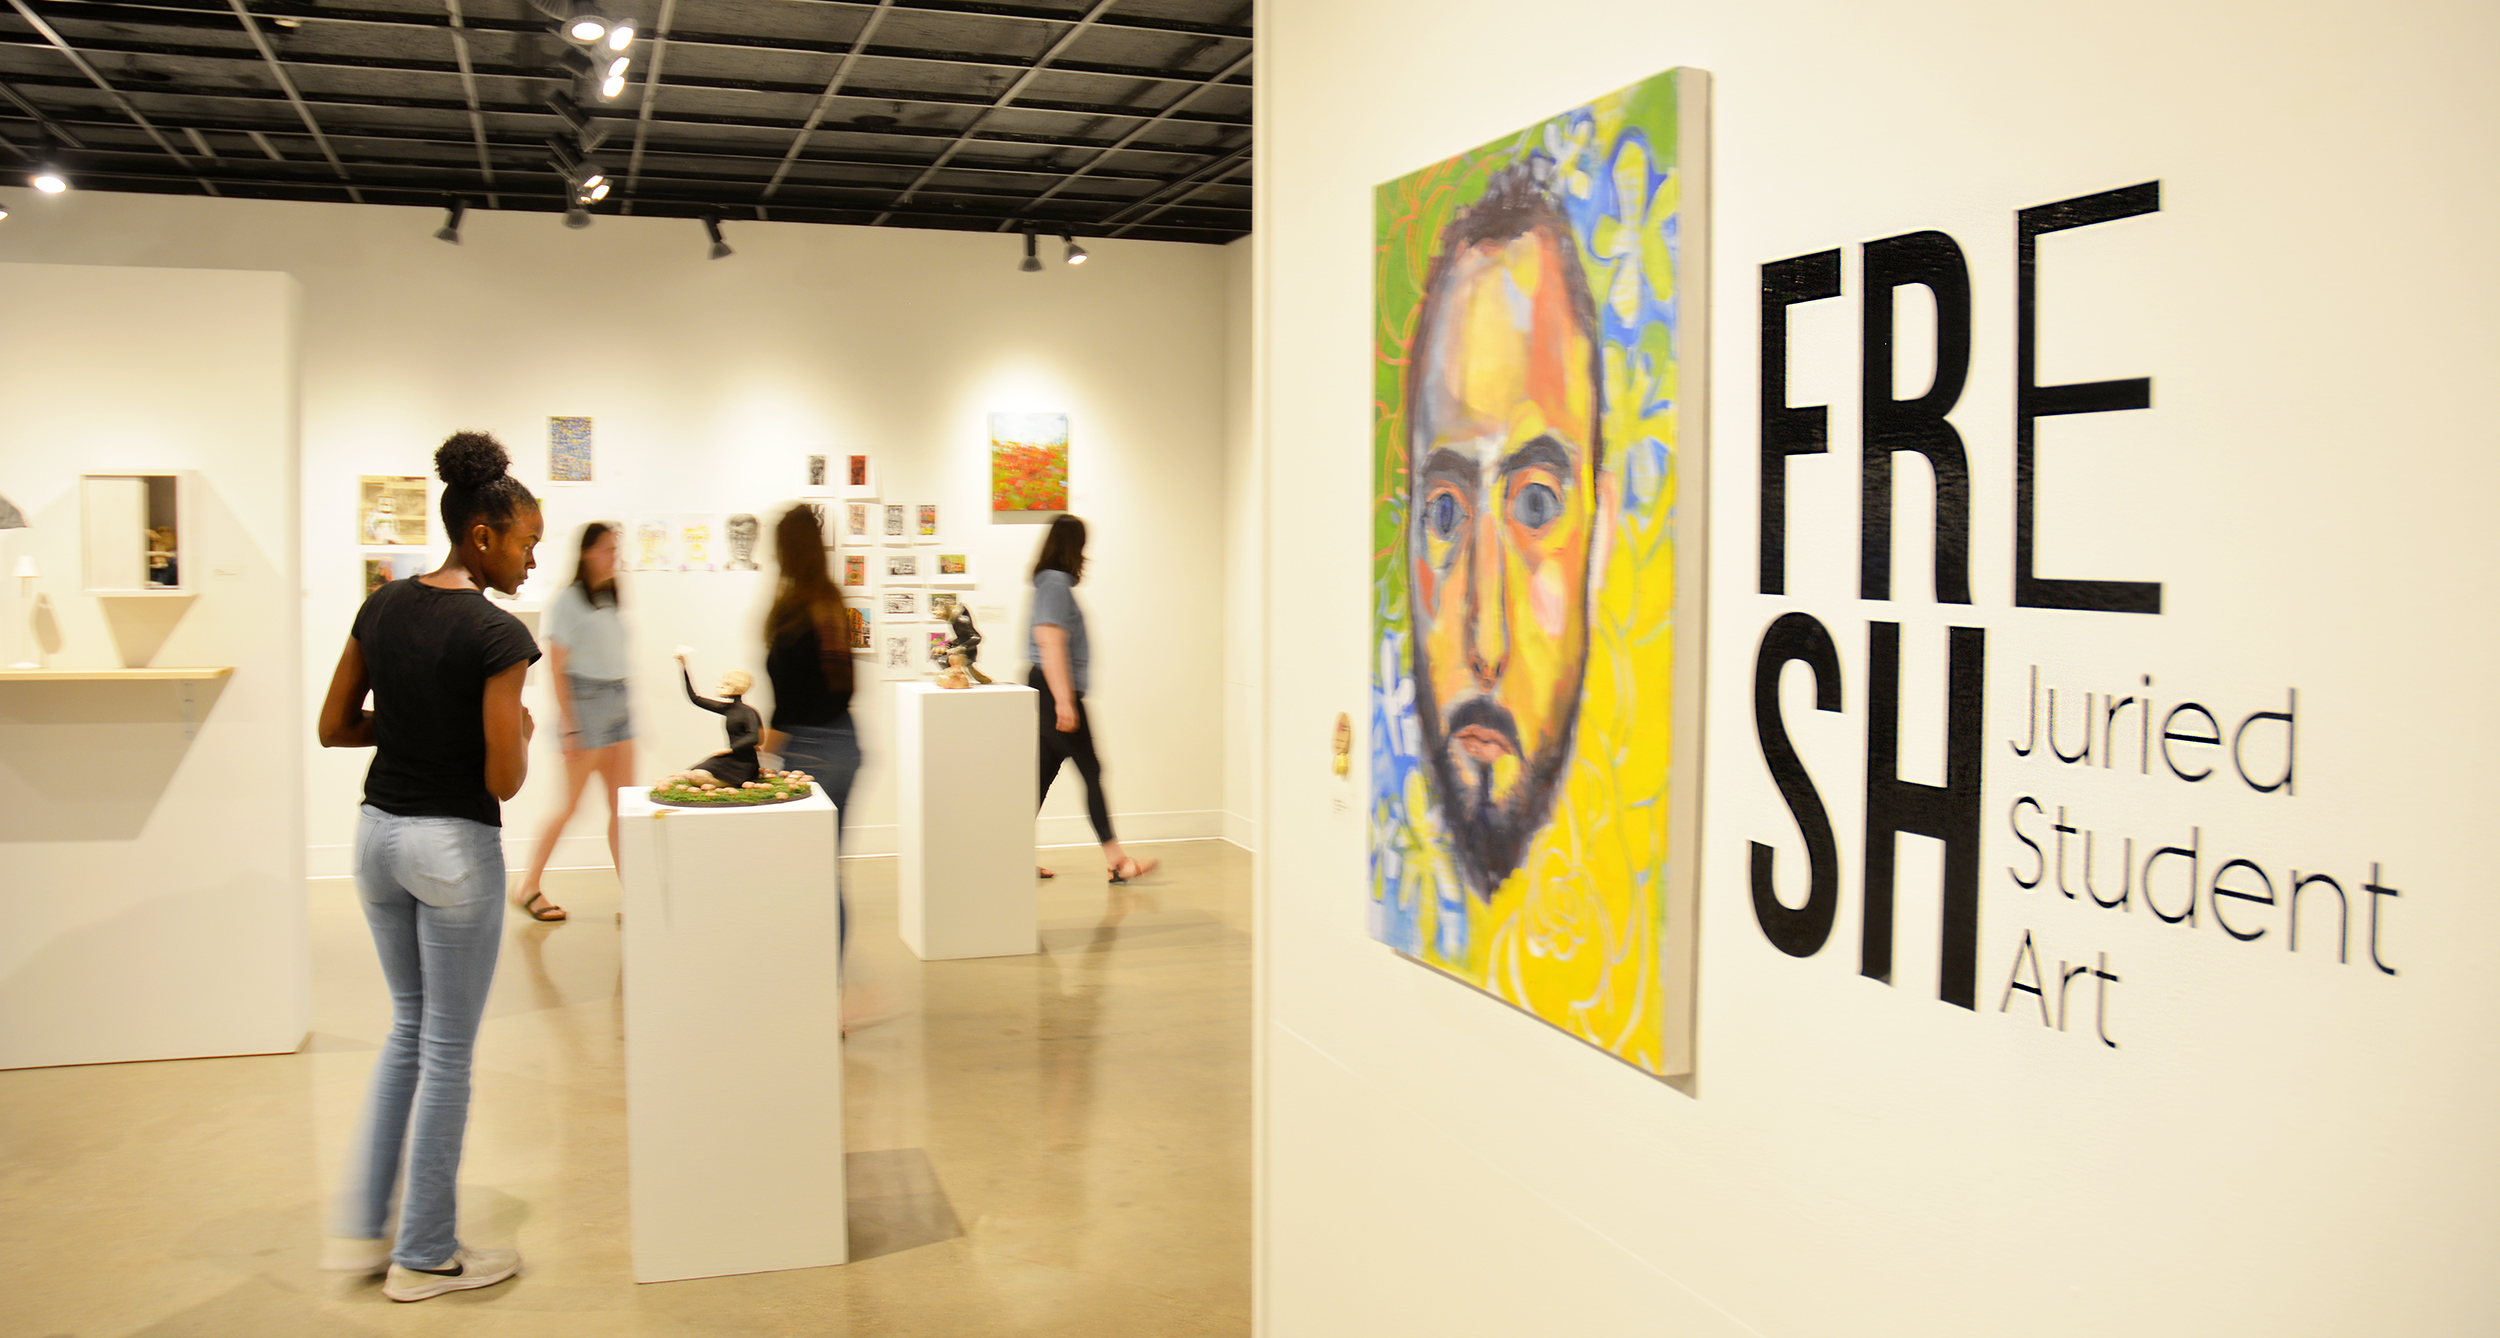 Transylvania student art show ‘one for the record books’